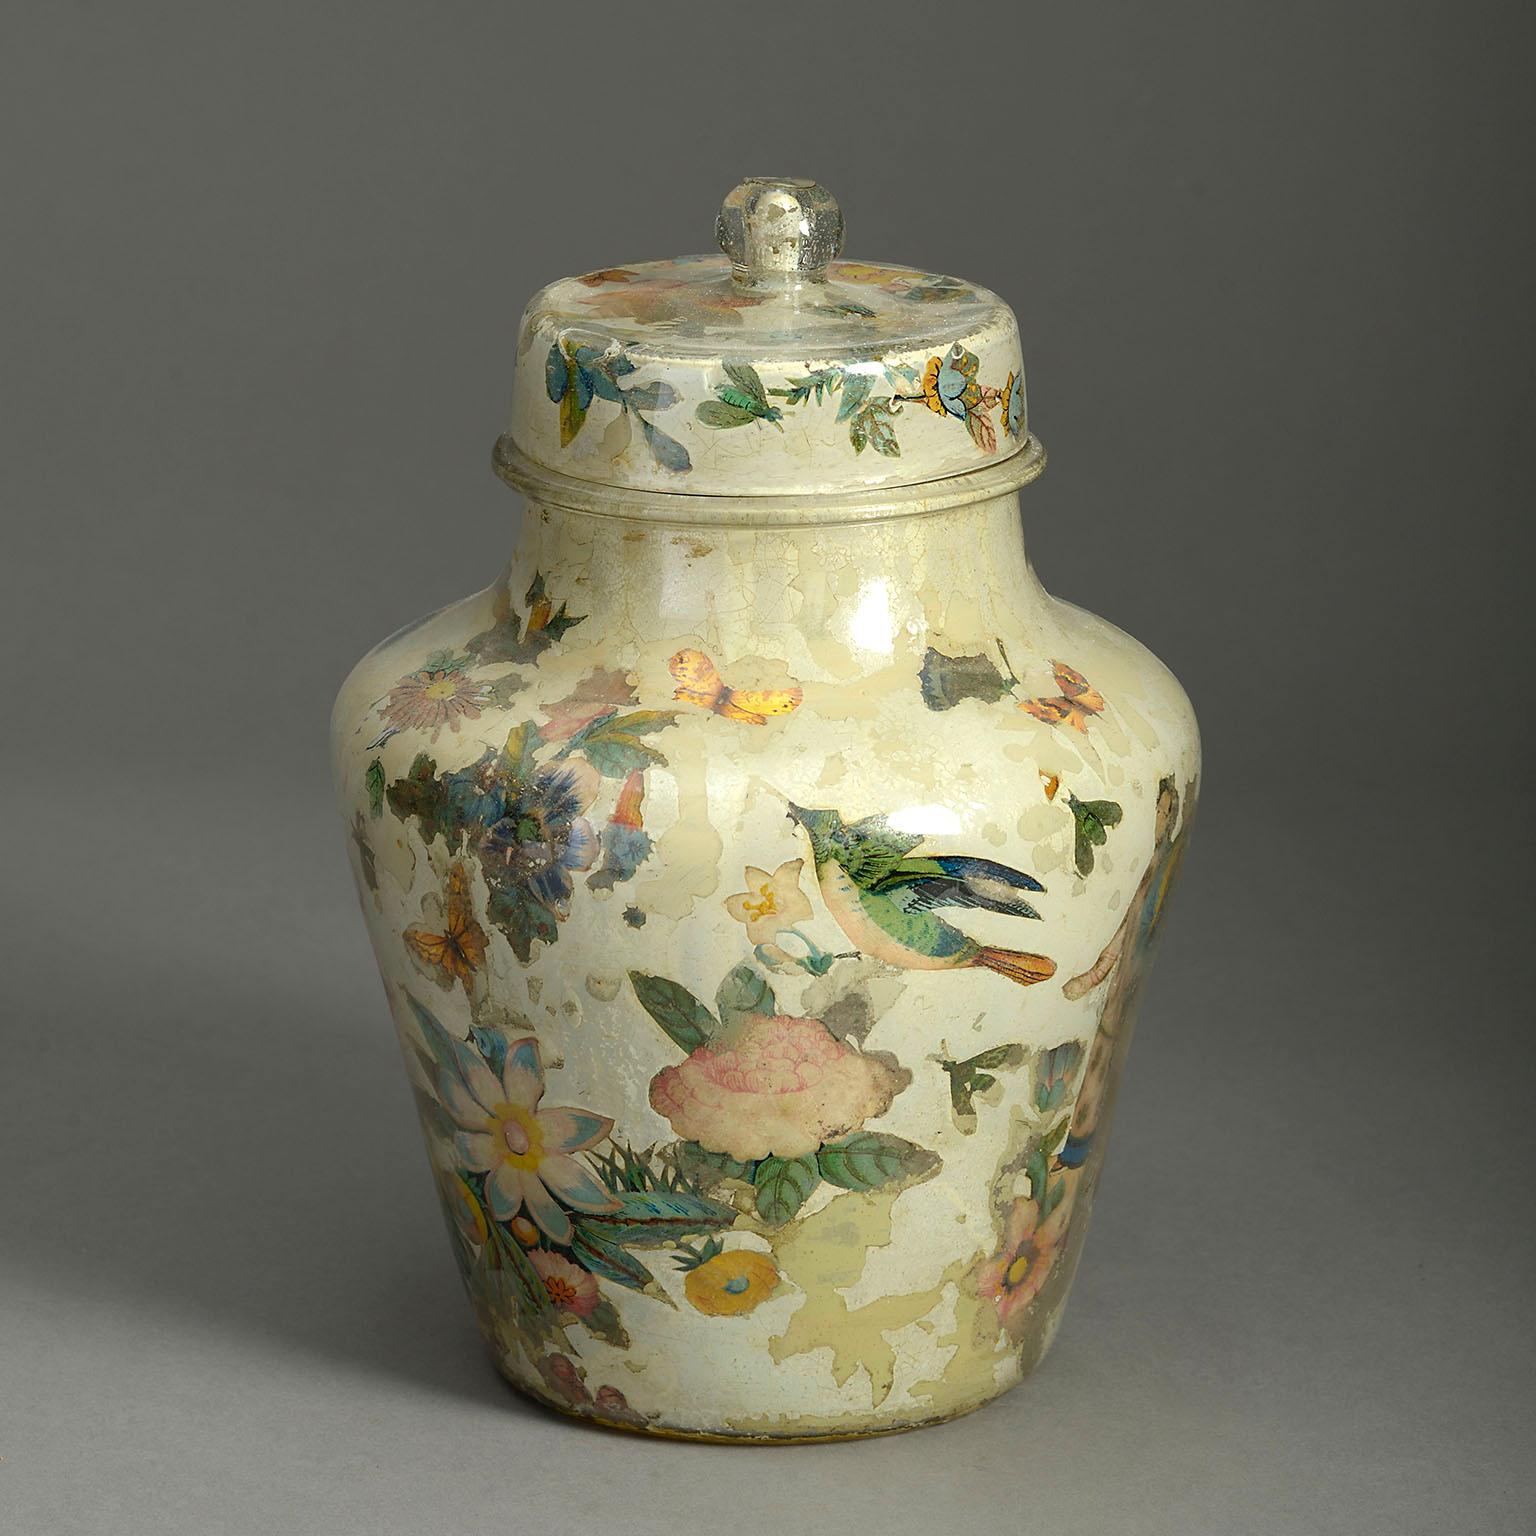 A small mid-nineteenth century lidded Decalcomania jar and cover, the knopped lid above a tapering vase base, all decorated with hand-coloured chinoiseries, internally applied, upon a cream ground.